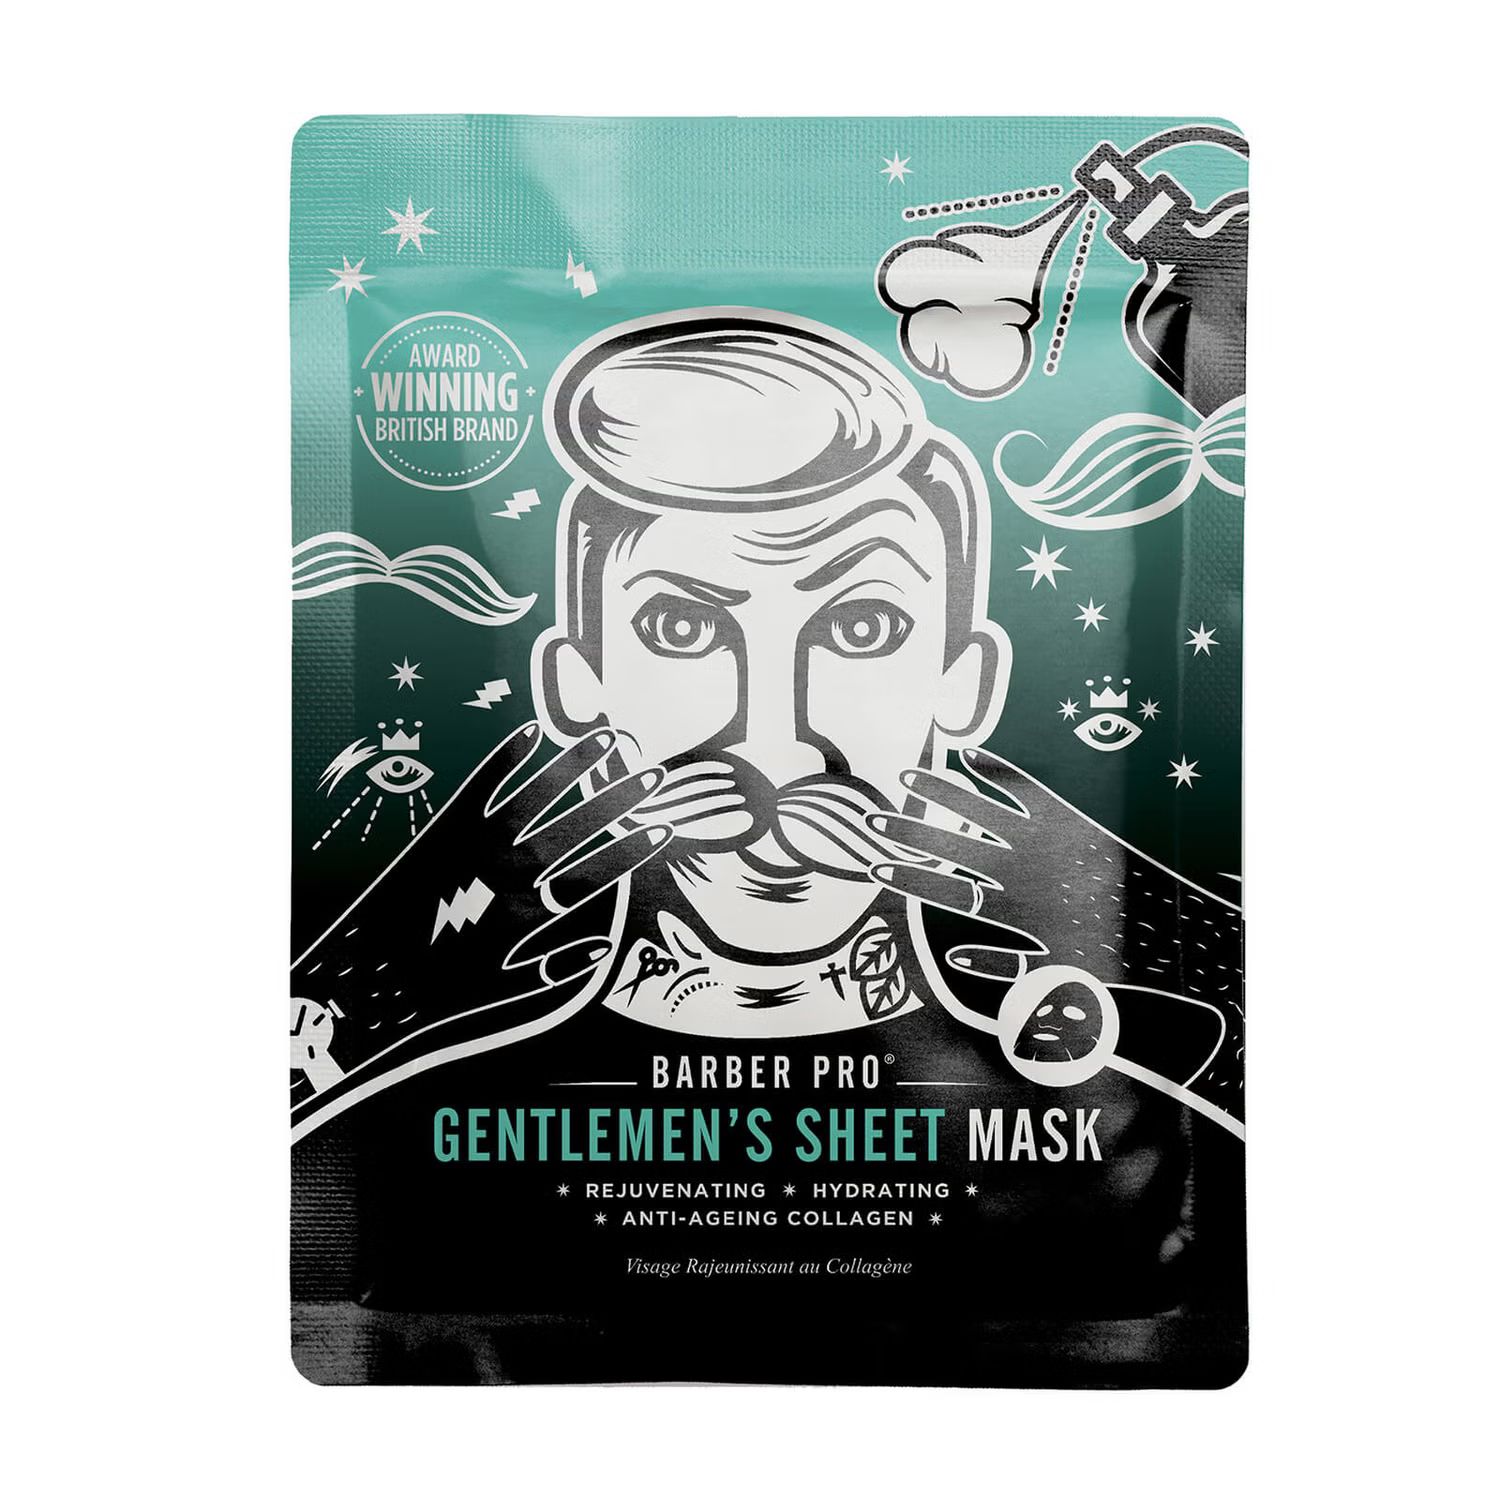 BARBER PRO Gentlemen's Sheet Mask Rejuvenating and Hydrating with Anti-Ageing Collagen | Look Fantastic (ROW)